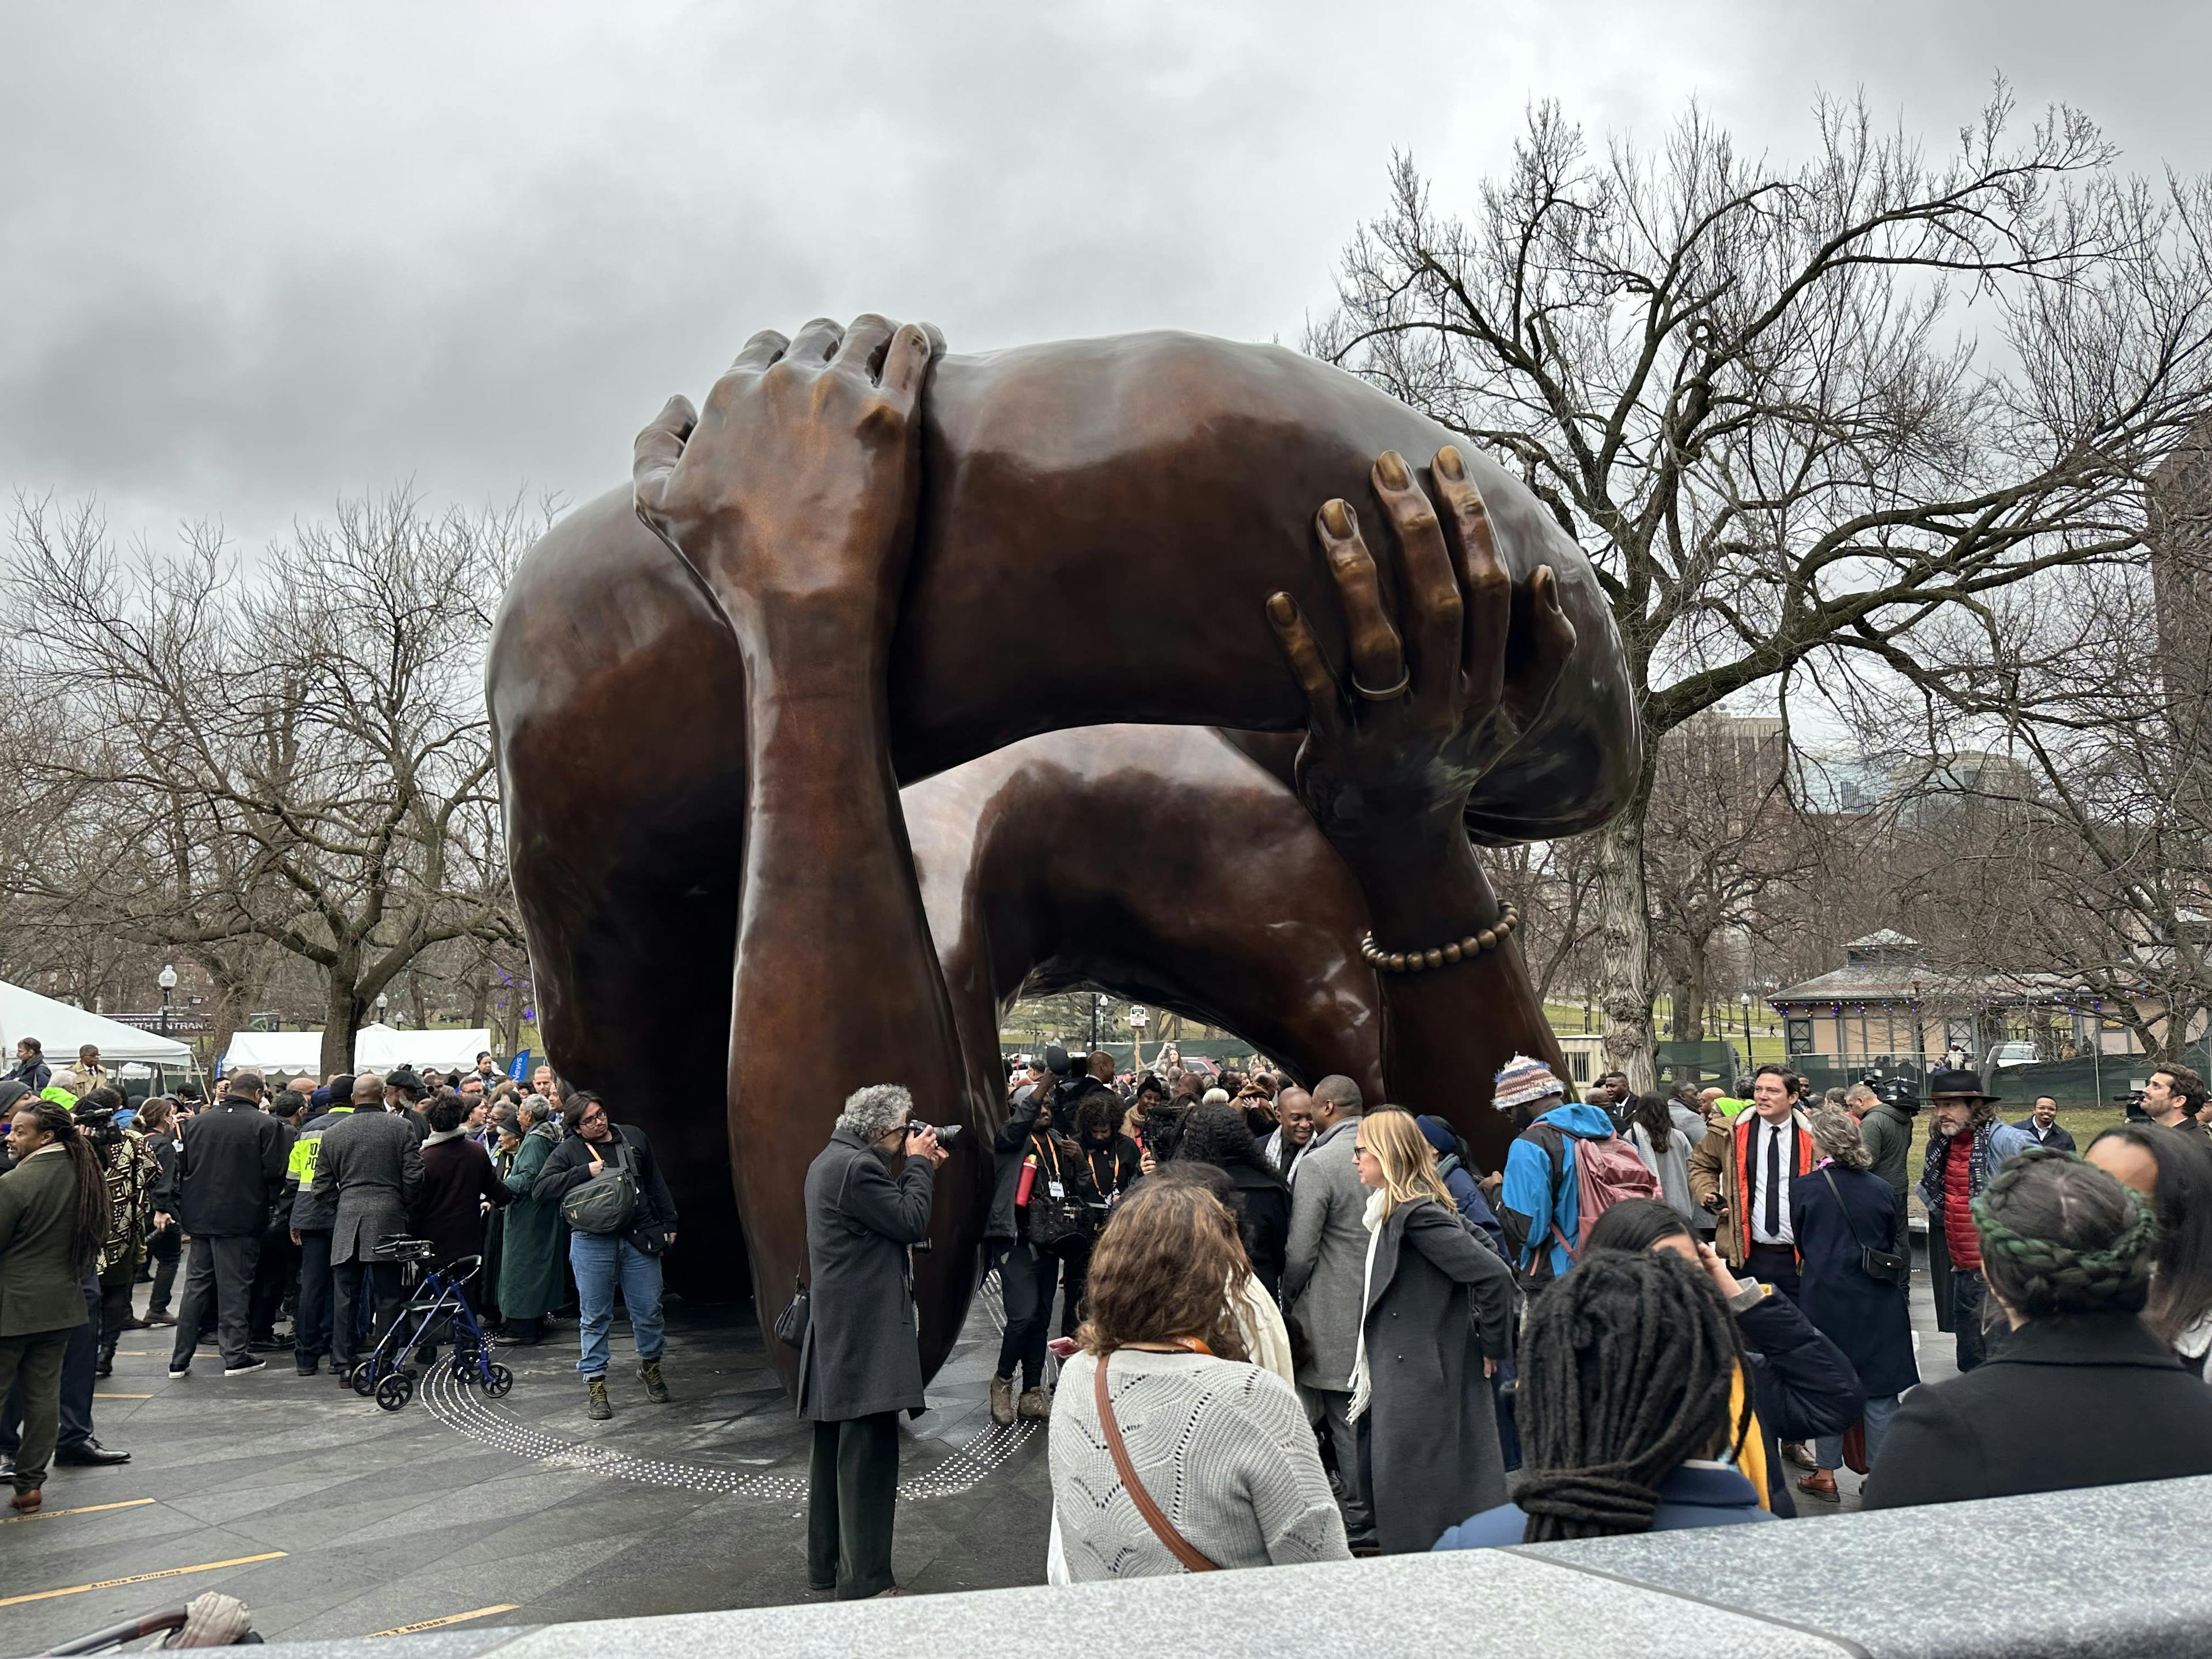 Large bronze sculpture of two hands holding up an indiscernible object, surrounded by a crowd of visitirs.